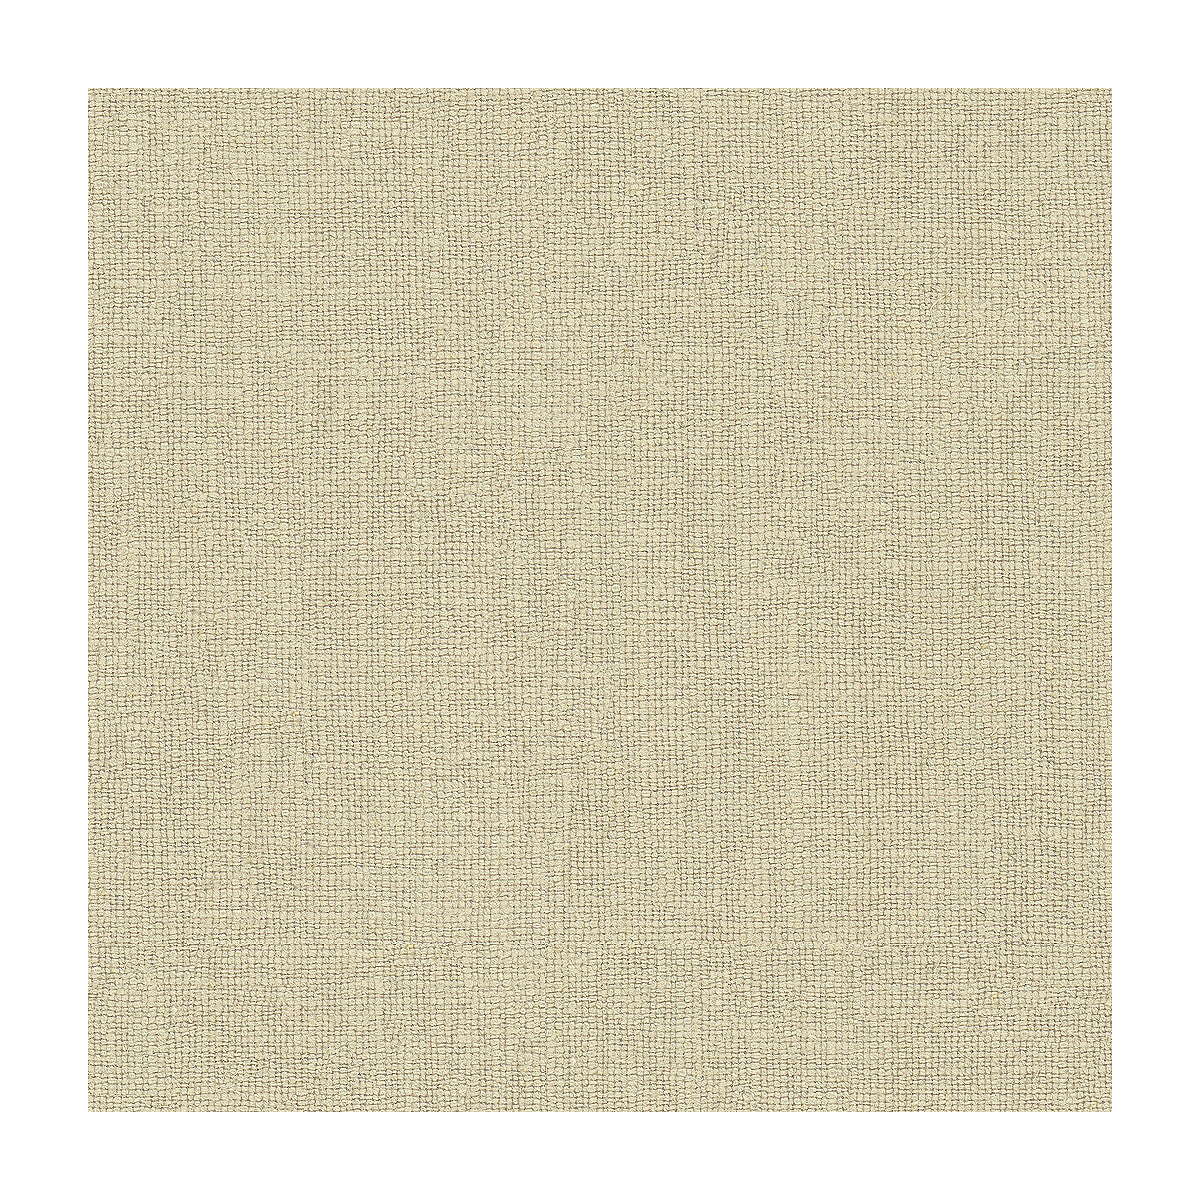 Kravet Basics fabric in 32612-1611 color - pattern 32612.1611.0 - by Kravet Basics in the Perfect Plains collection